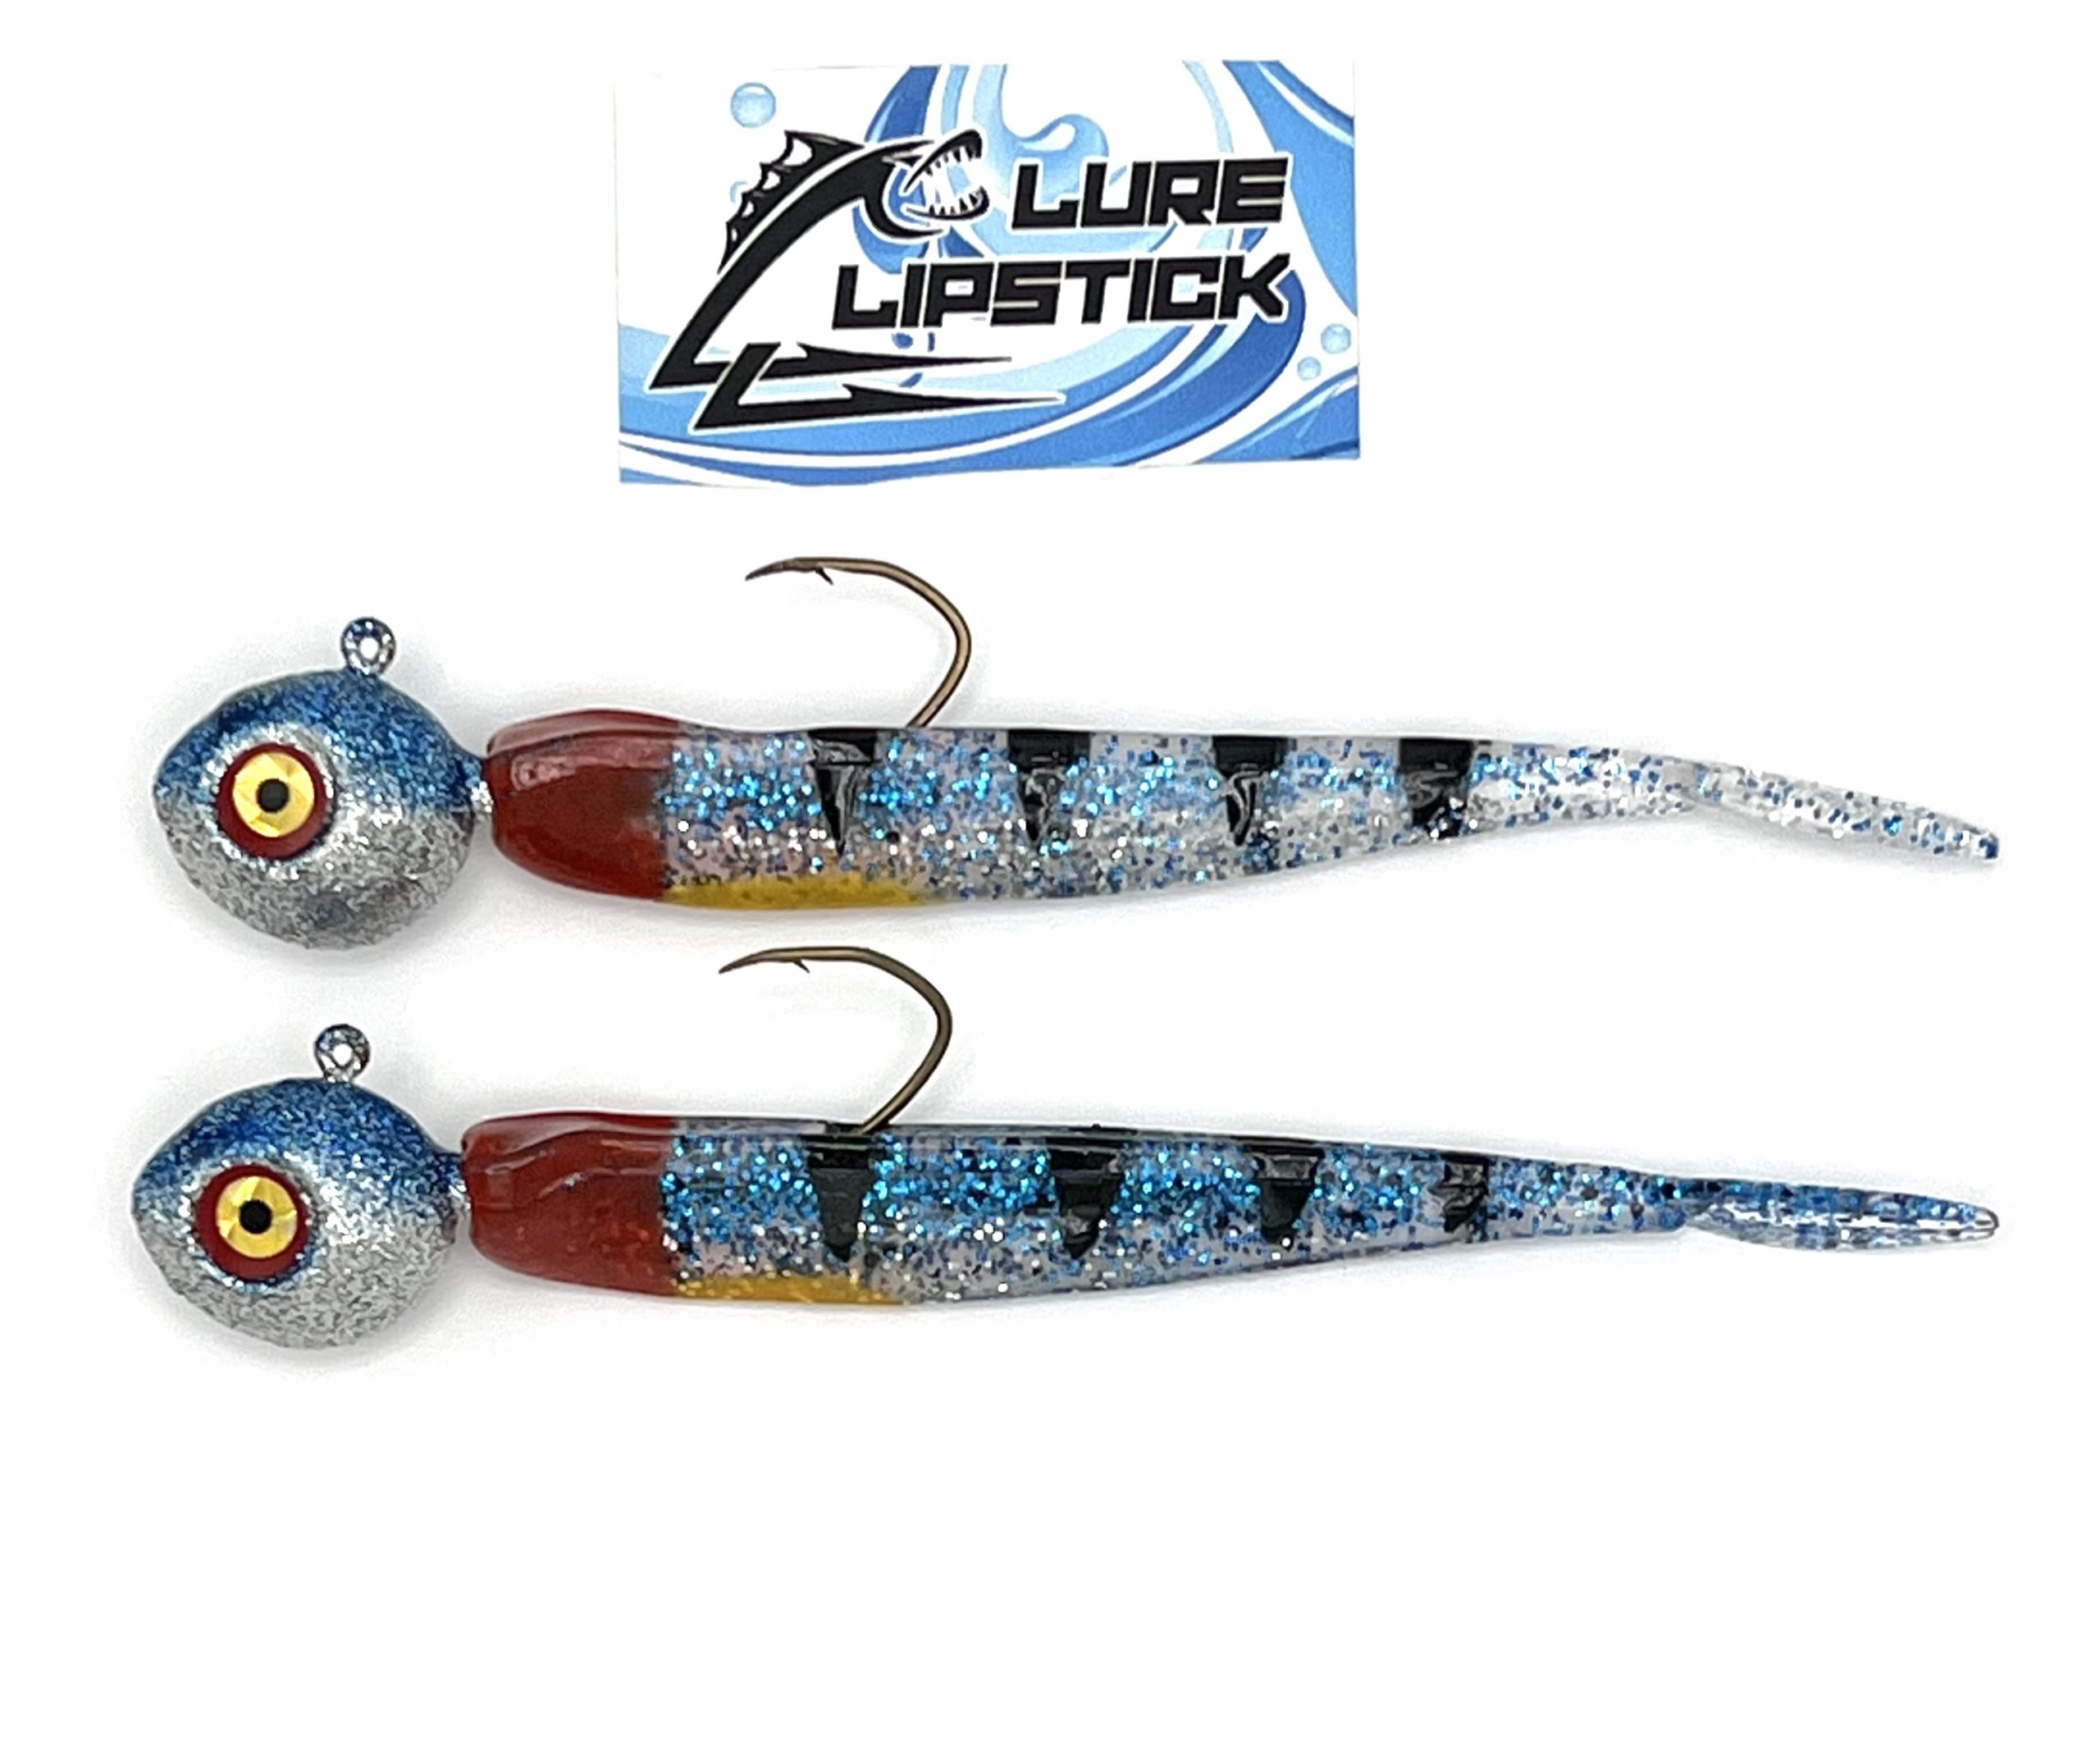 Lure Lipstick - Custom Walleye Ready Rigs! Available in